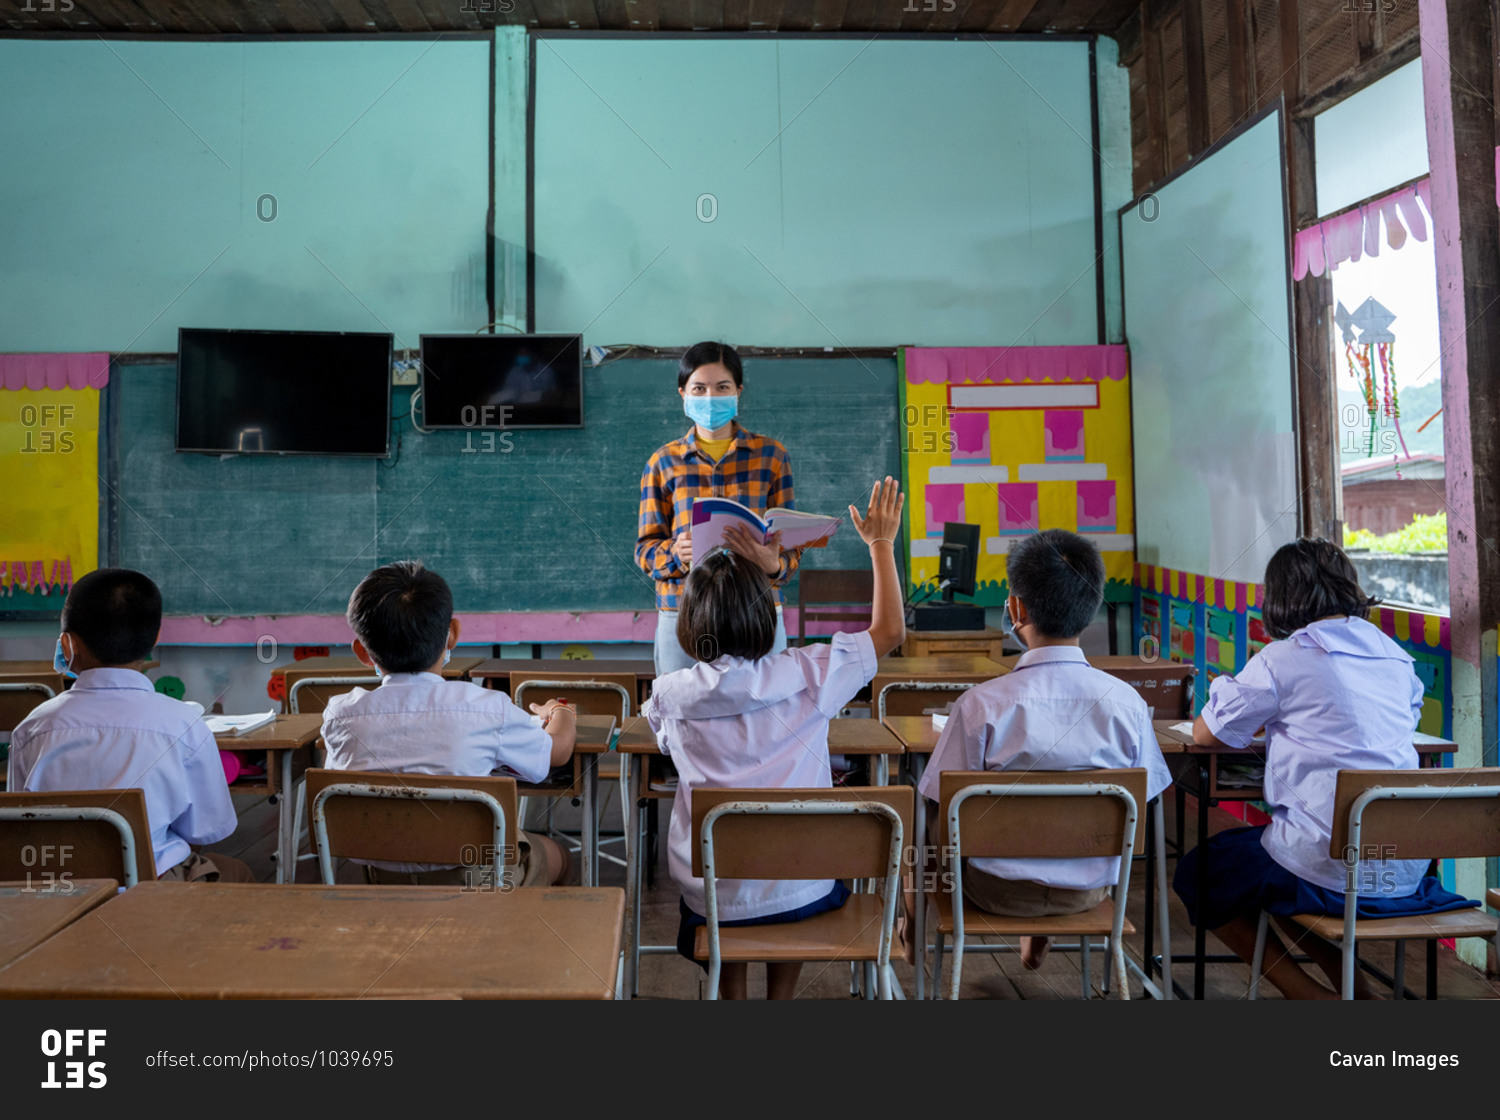 Asian children wear face masks while learning in classroom